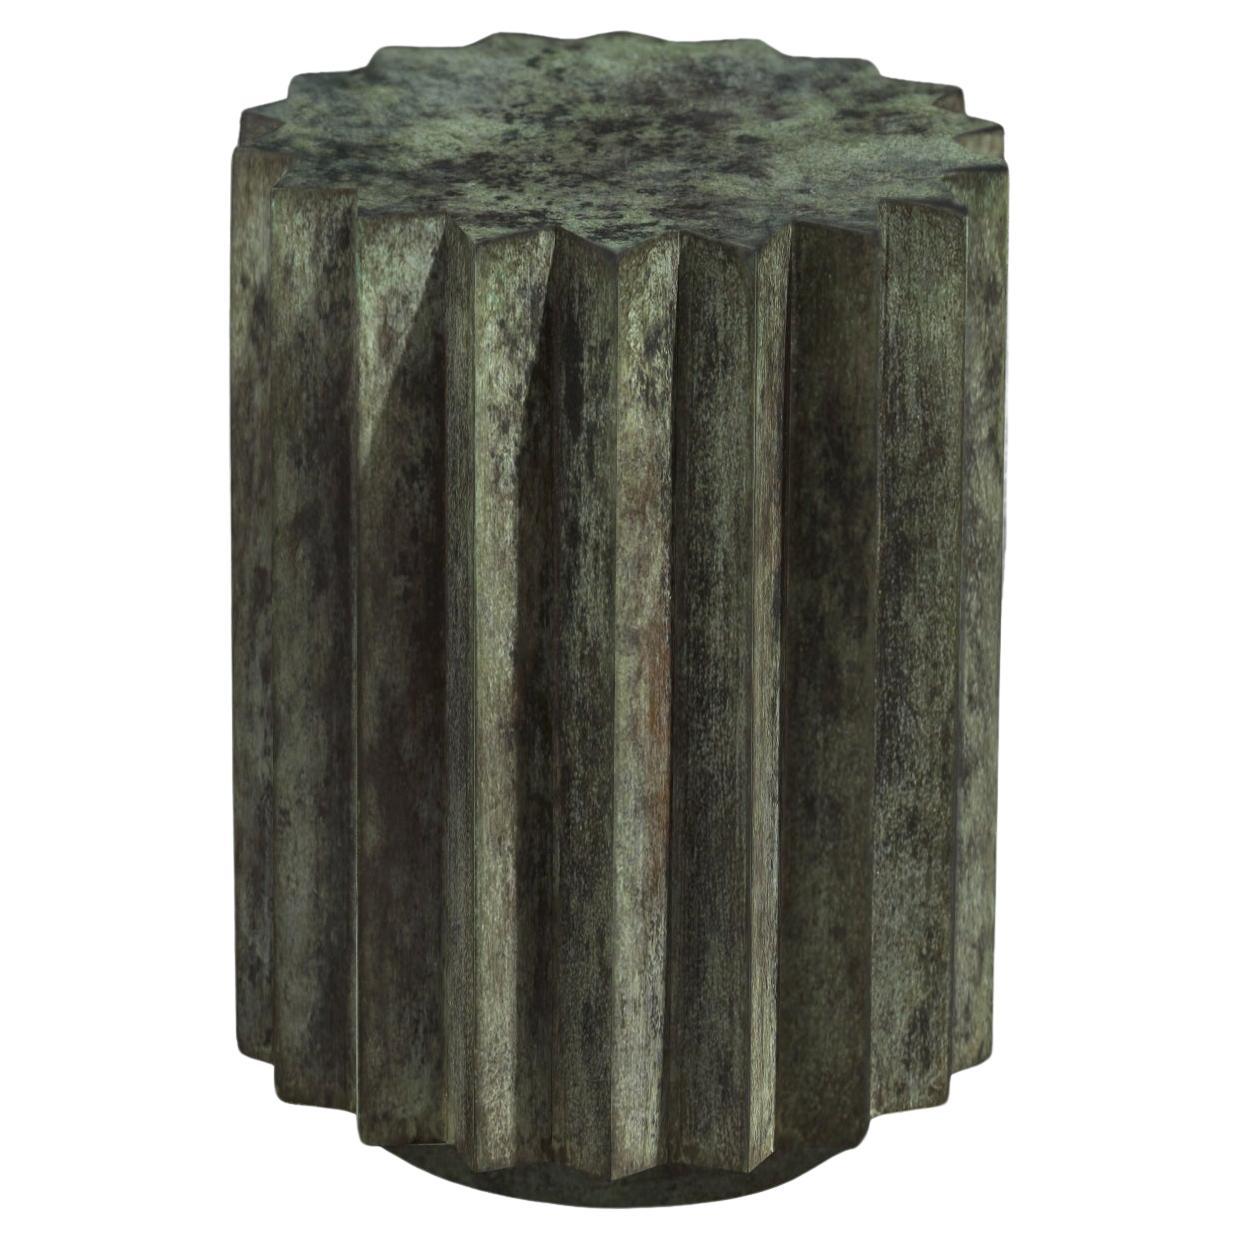 Doris Cast Bronze Multifaceted Side Table with Tuscan Green Patina